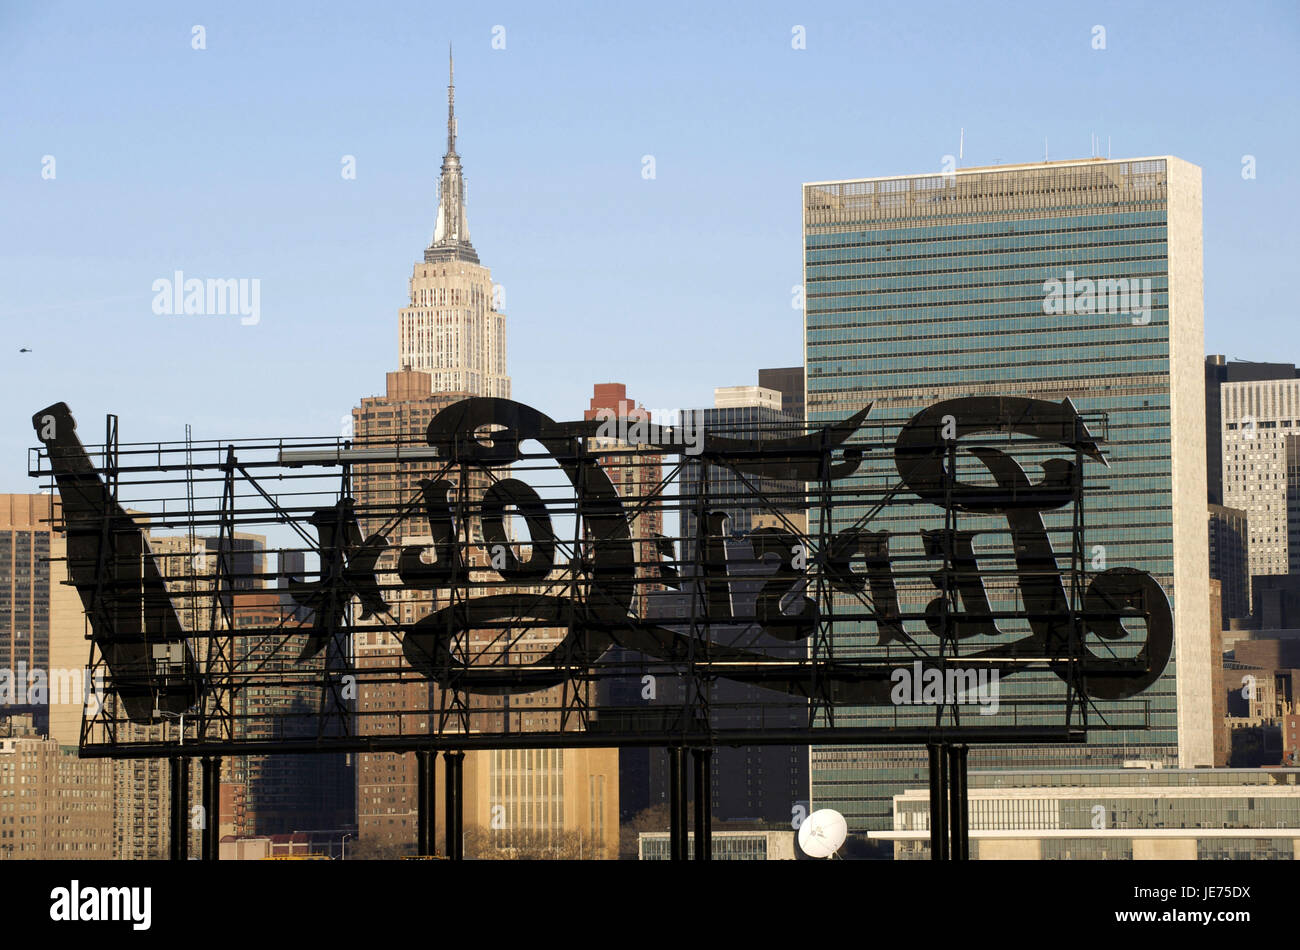 The USA, America, New York, Manhattan with empire State Building, advertisement character font in the foreground, Stock Photo